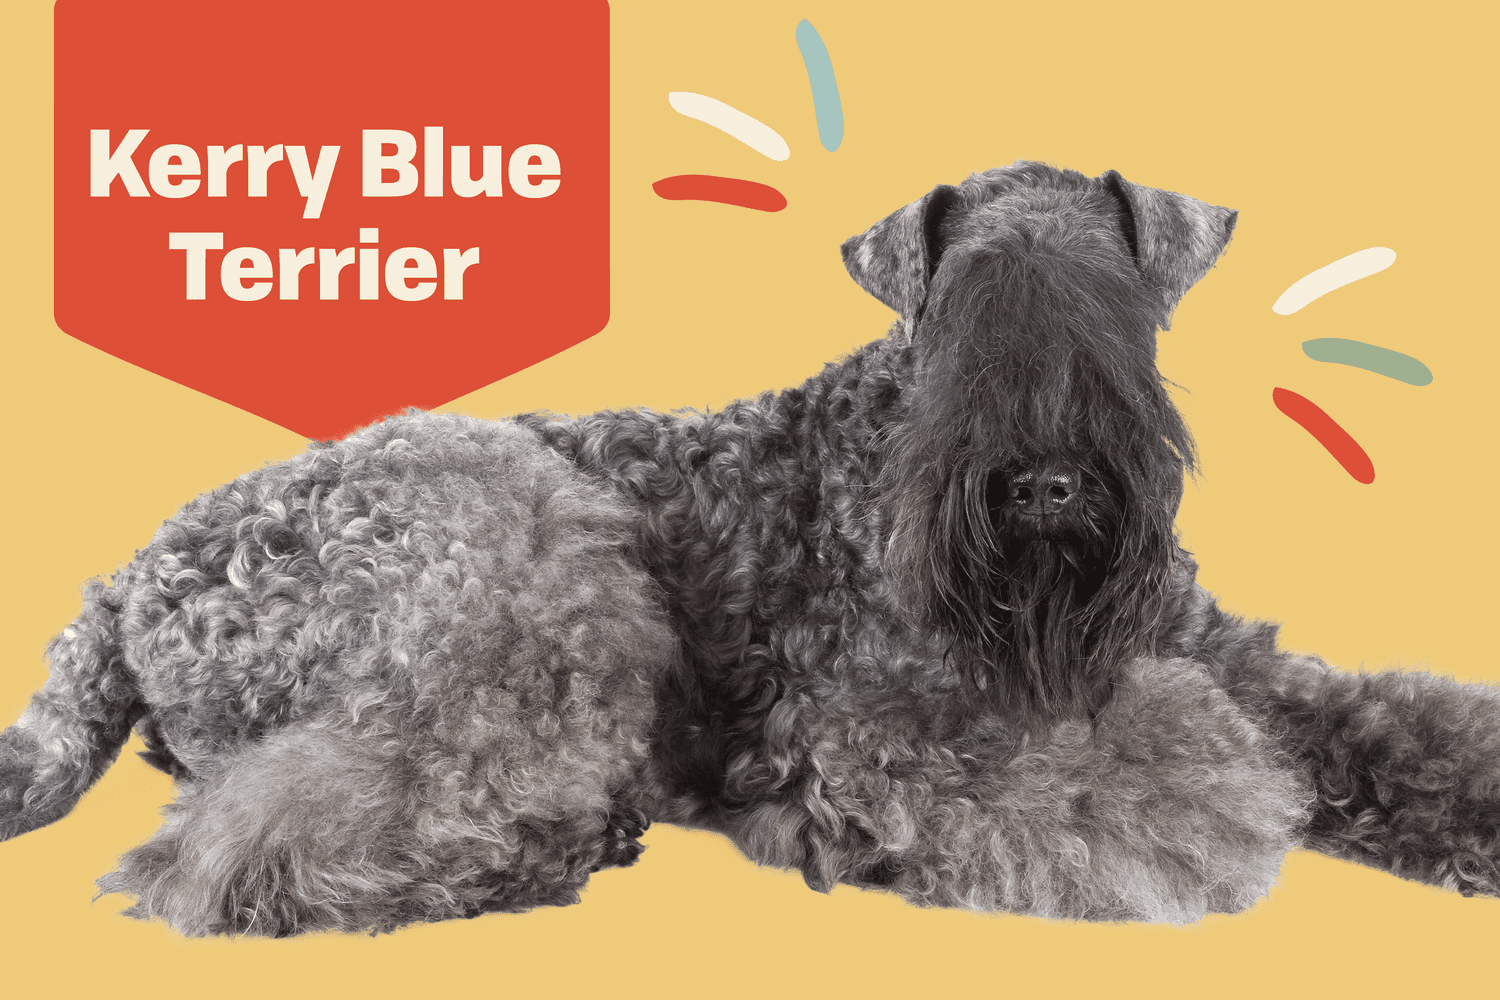 Kerry Blue Terrier Dog Breed Information and Characteristics | Daily Paws